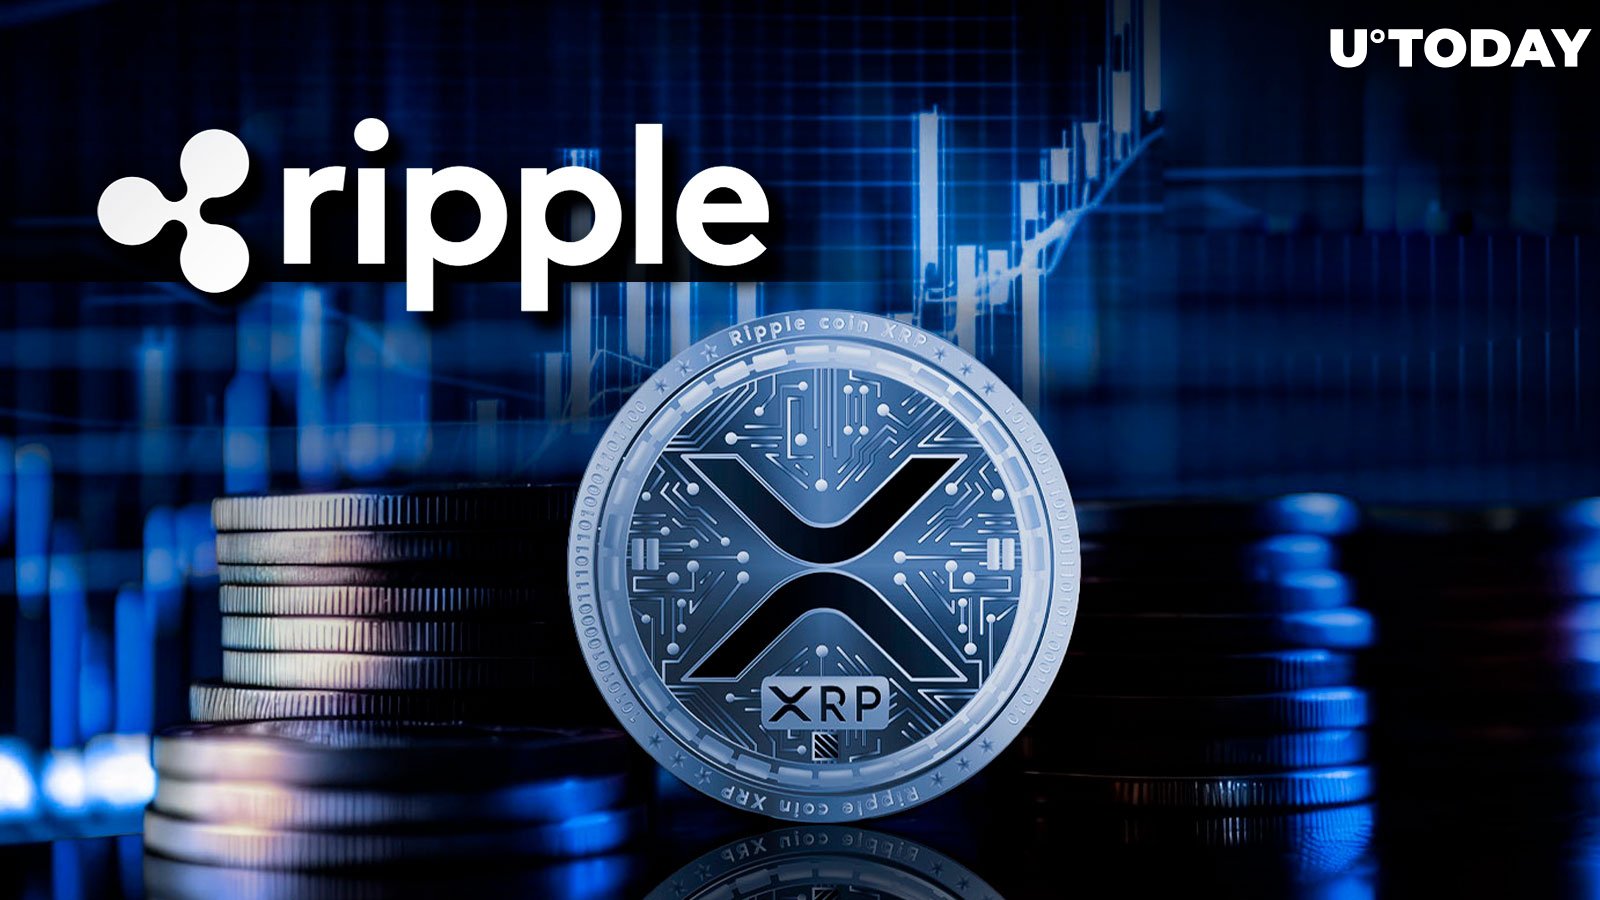 XRP Eyes Potential Price Rally Amid Ripple Event, Similar to Solana (SOL) and Cardano